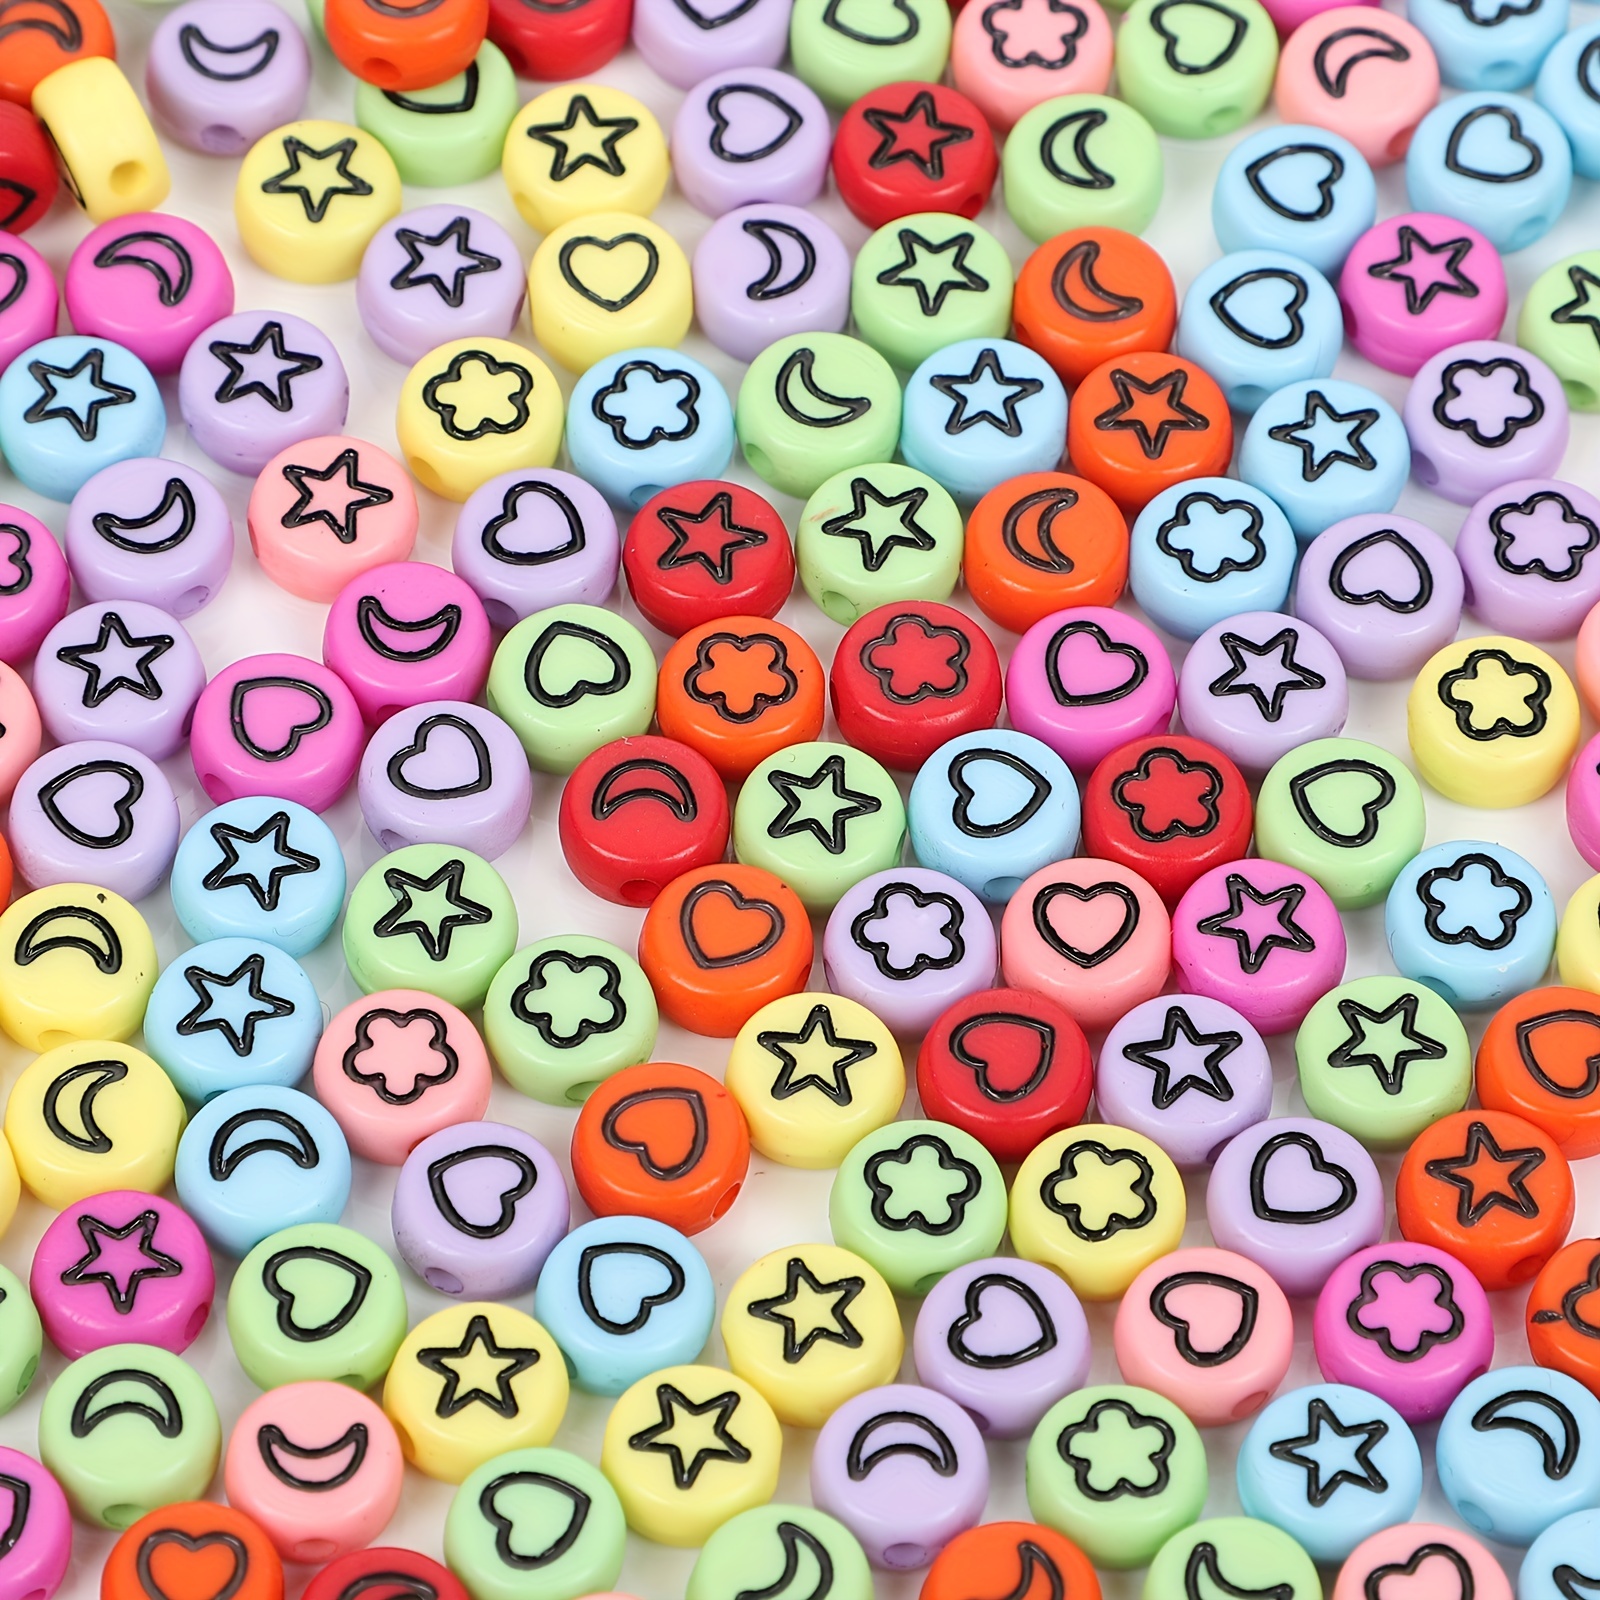 100 Pieces Red Craft Buttons Resin Buttons, 0.6 Inch 2 Holes Heart Shaped  Candy Colors Buttons, Bulk Sewing Buttons for Scrapbooking, Clothing